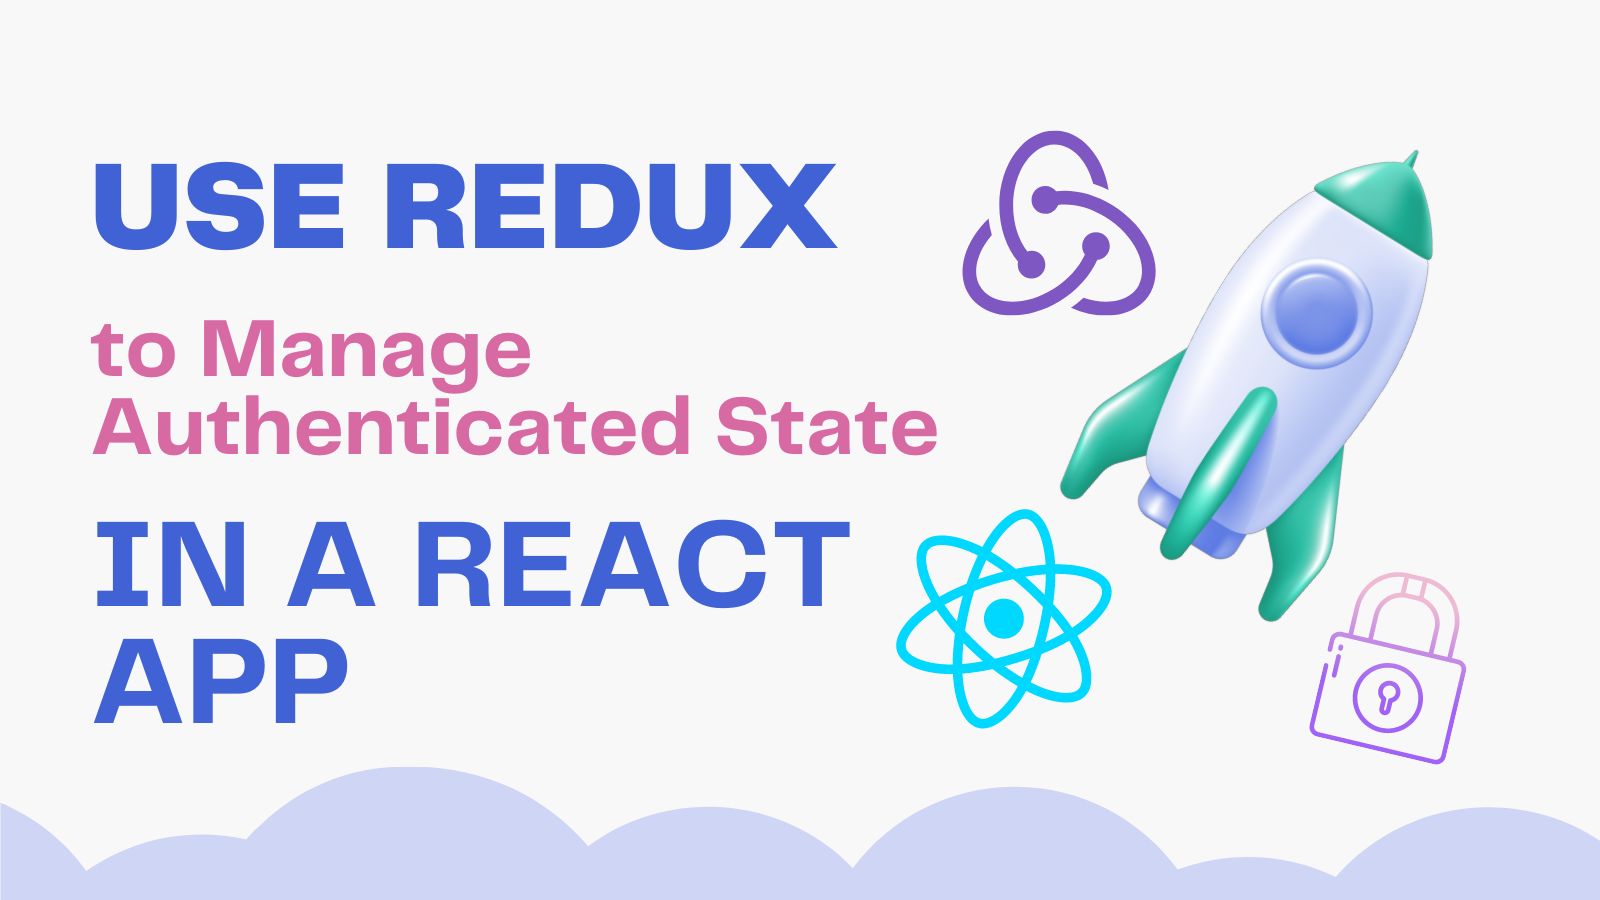 Use Redux to Manage Authenticated State in a React App